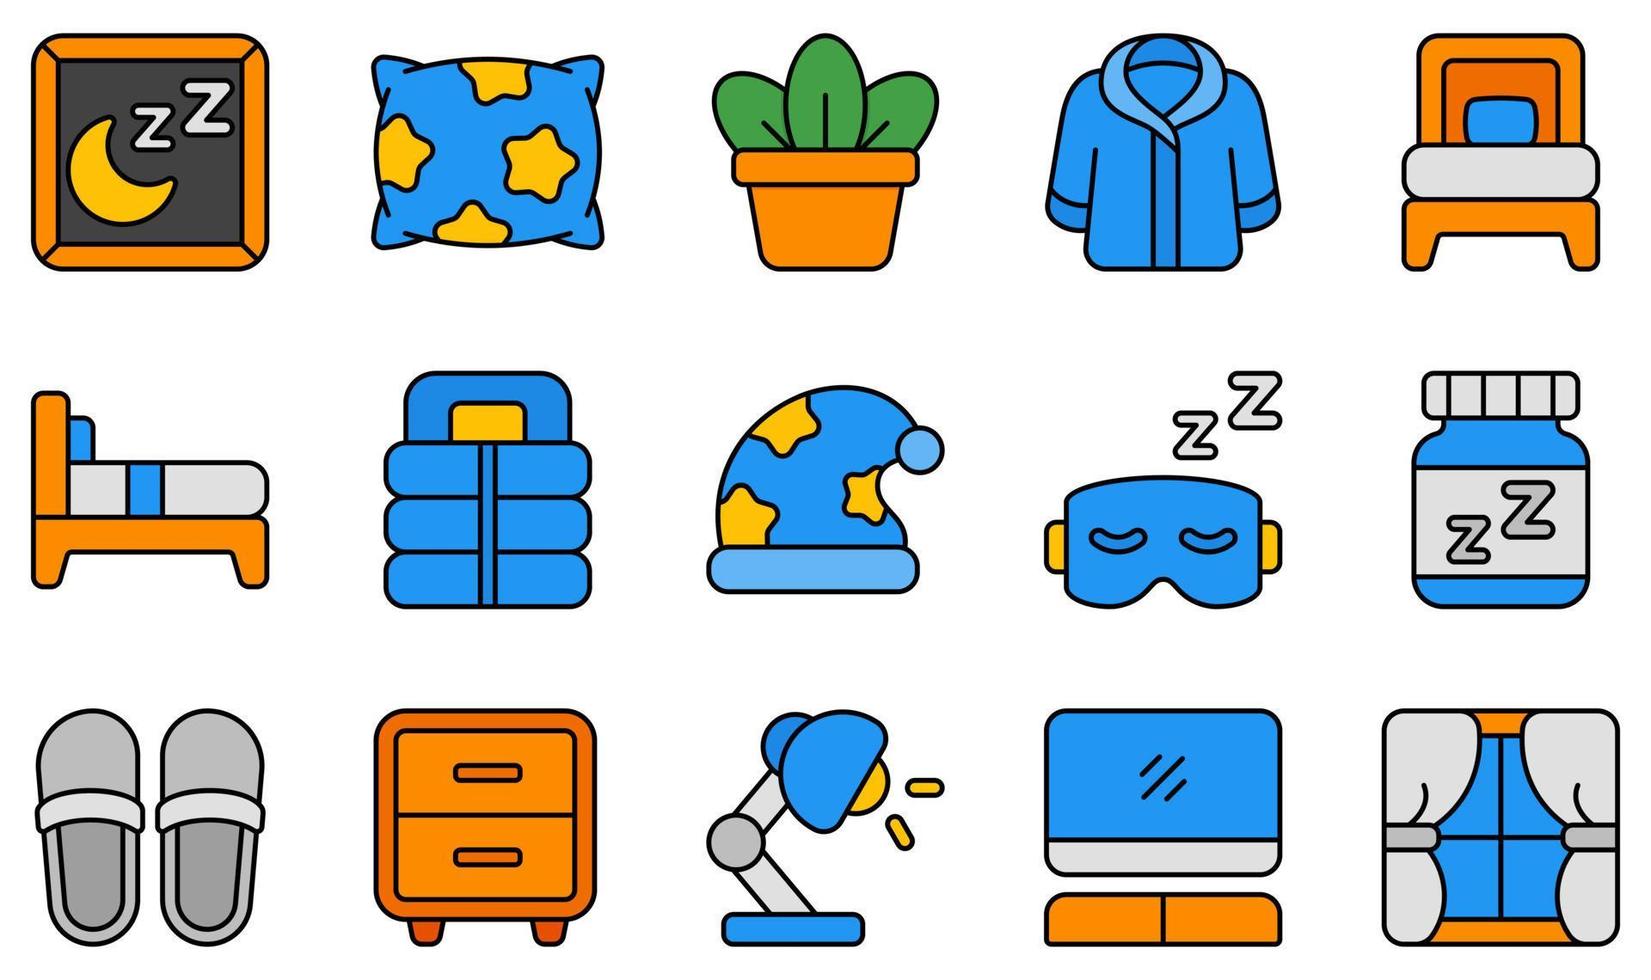 Set of Vector Icons Related to Bedroom. Contains such Icons as Pillow, Single Bed, Sleeping Bag, Slipper, Table, Television and more.